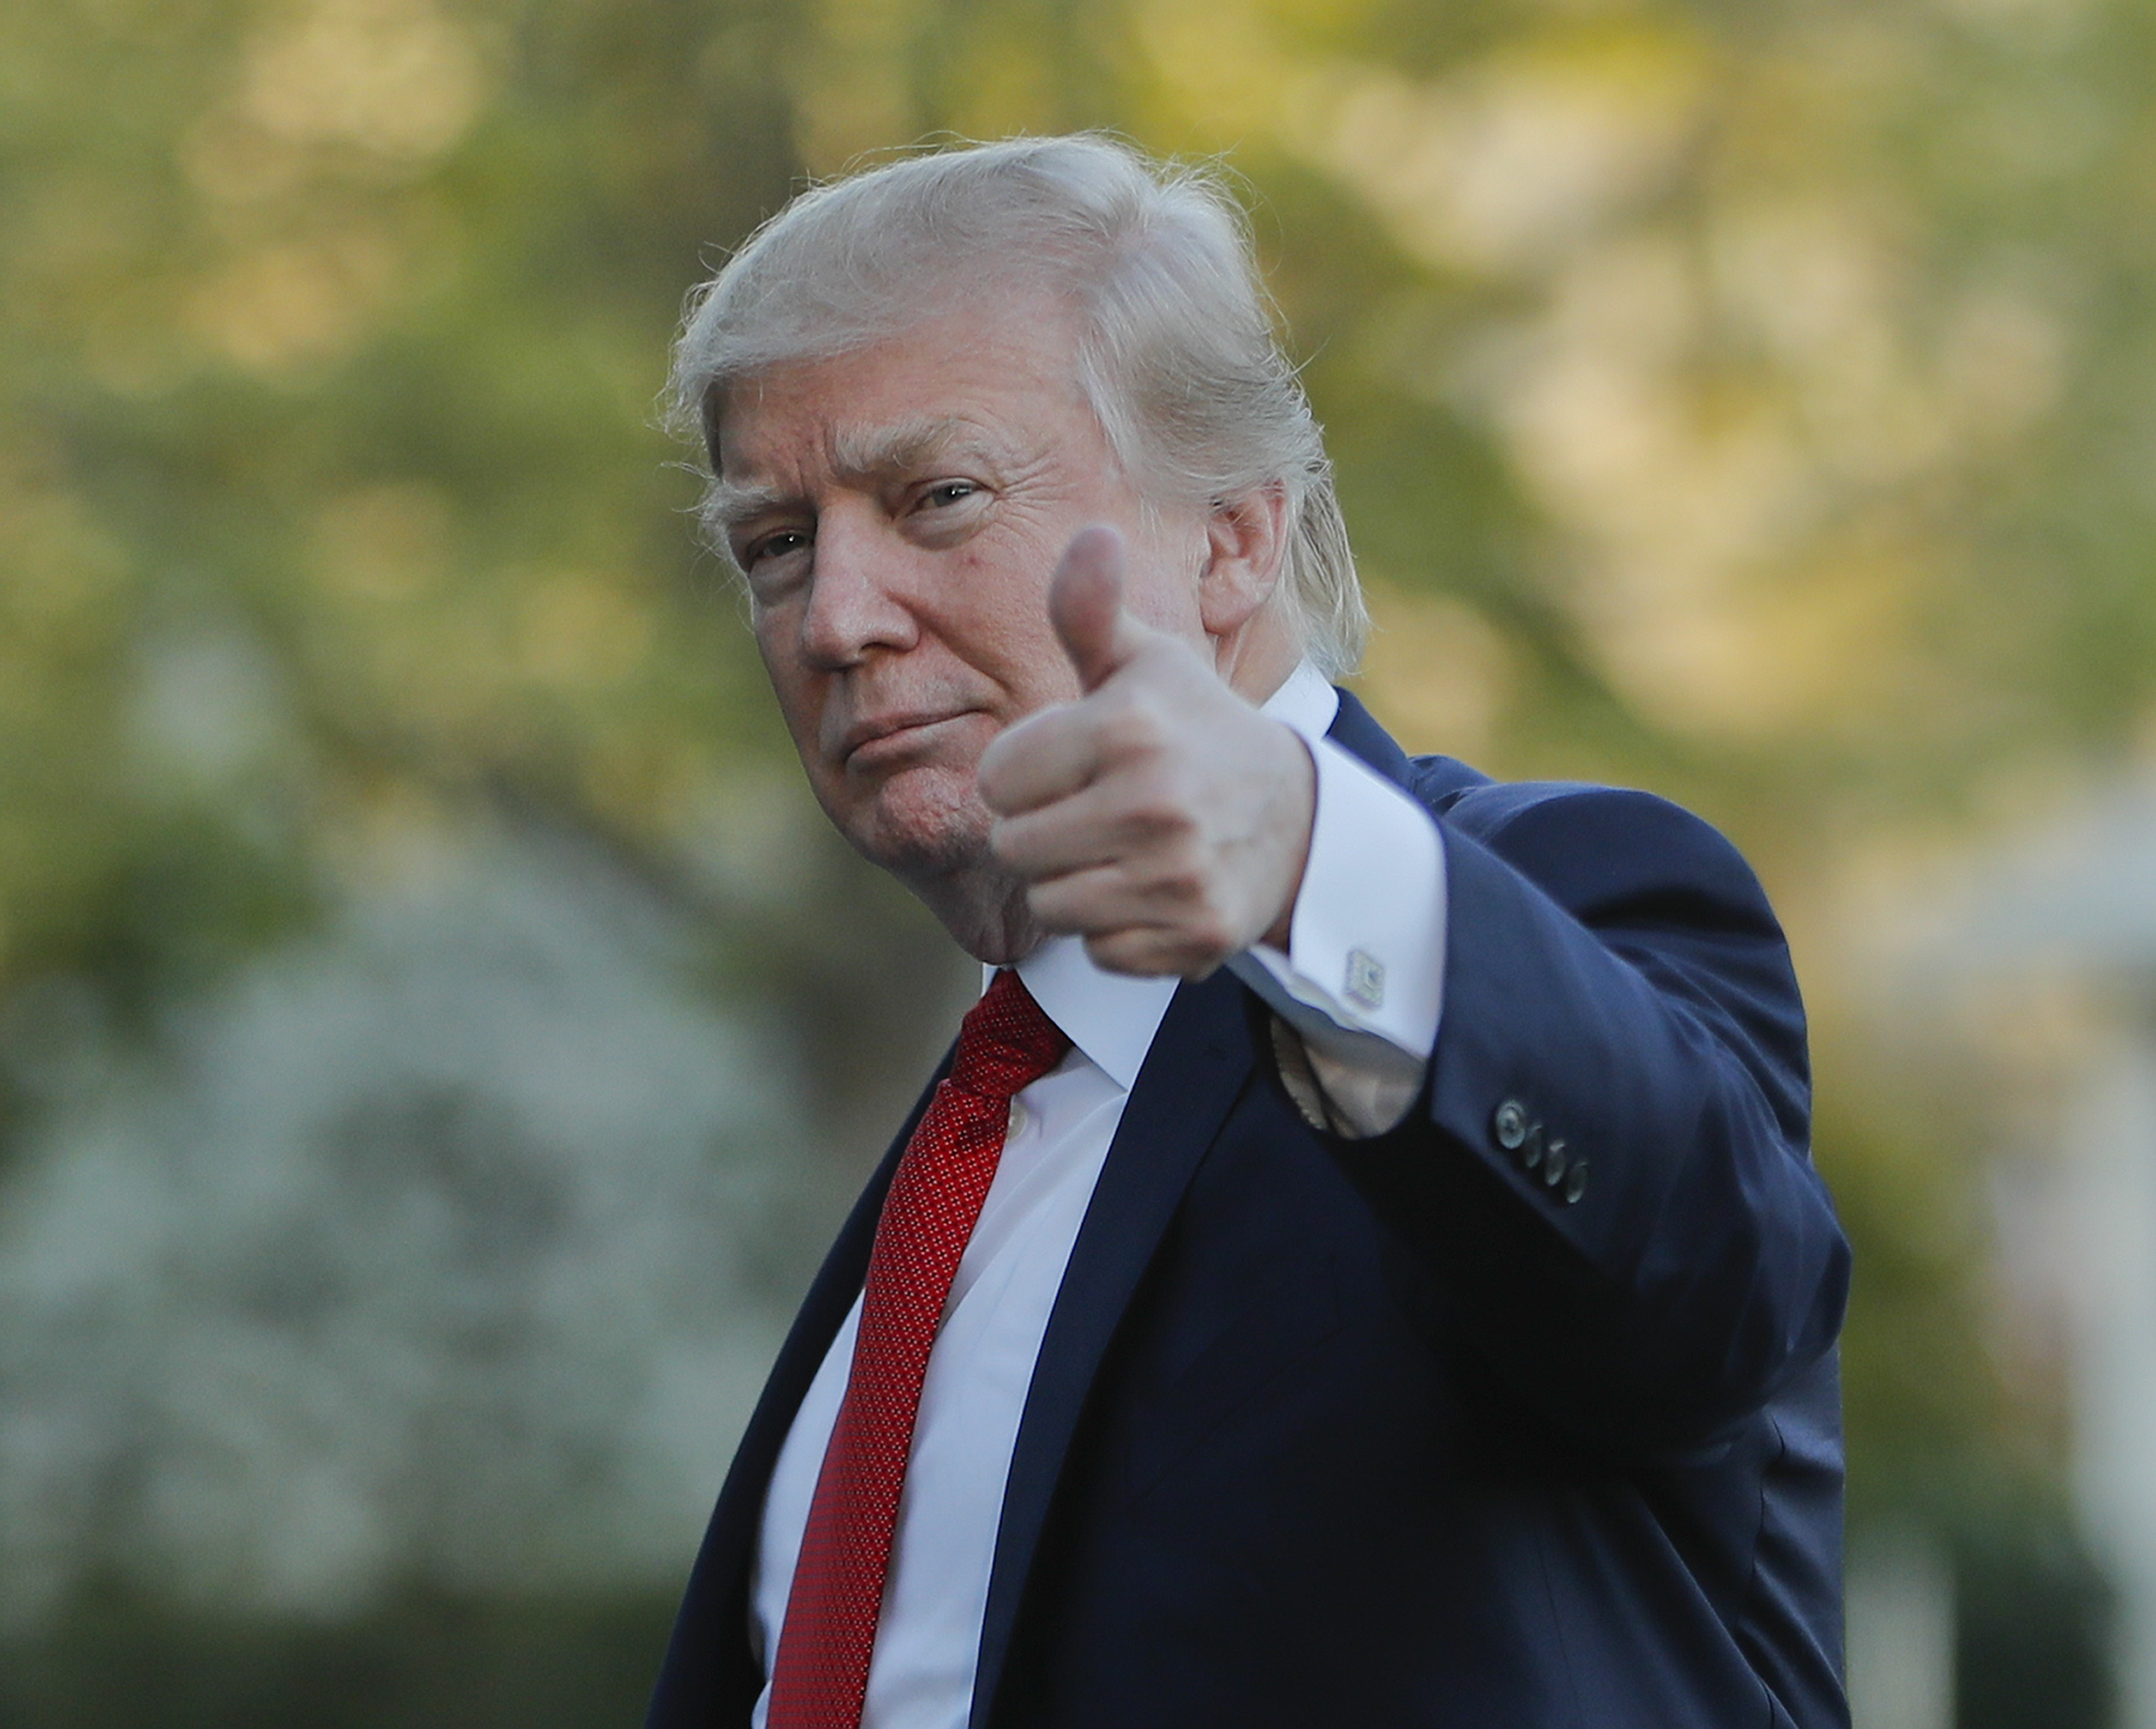 President Trump gives a thumbs-up on the way to Mar-a-Lago